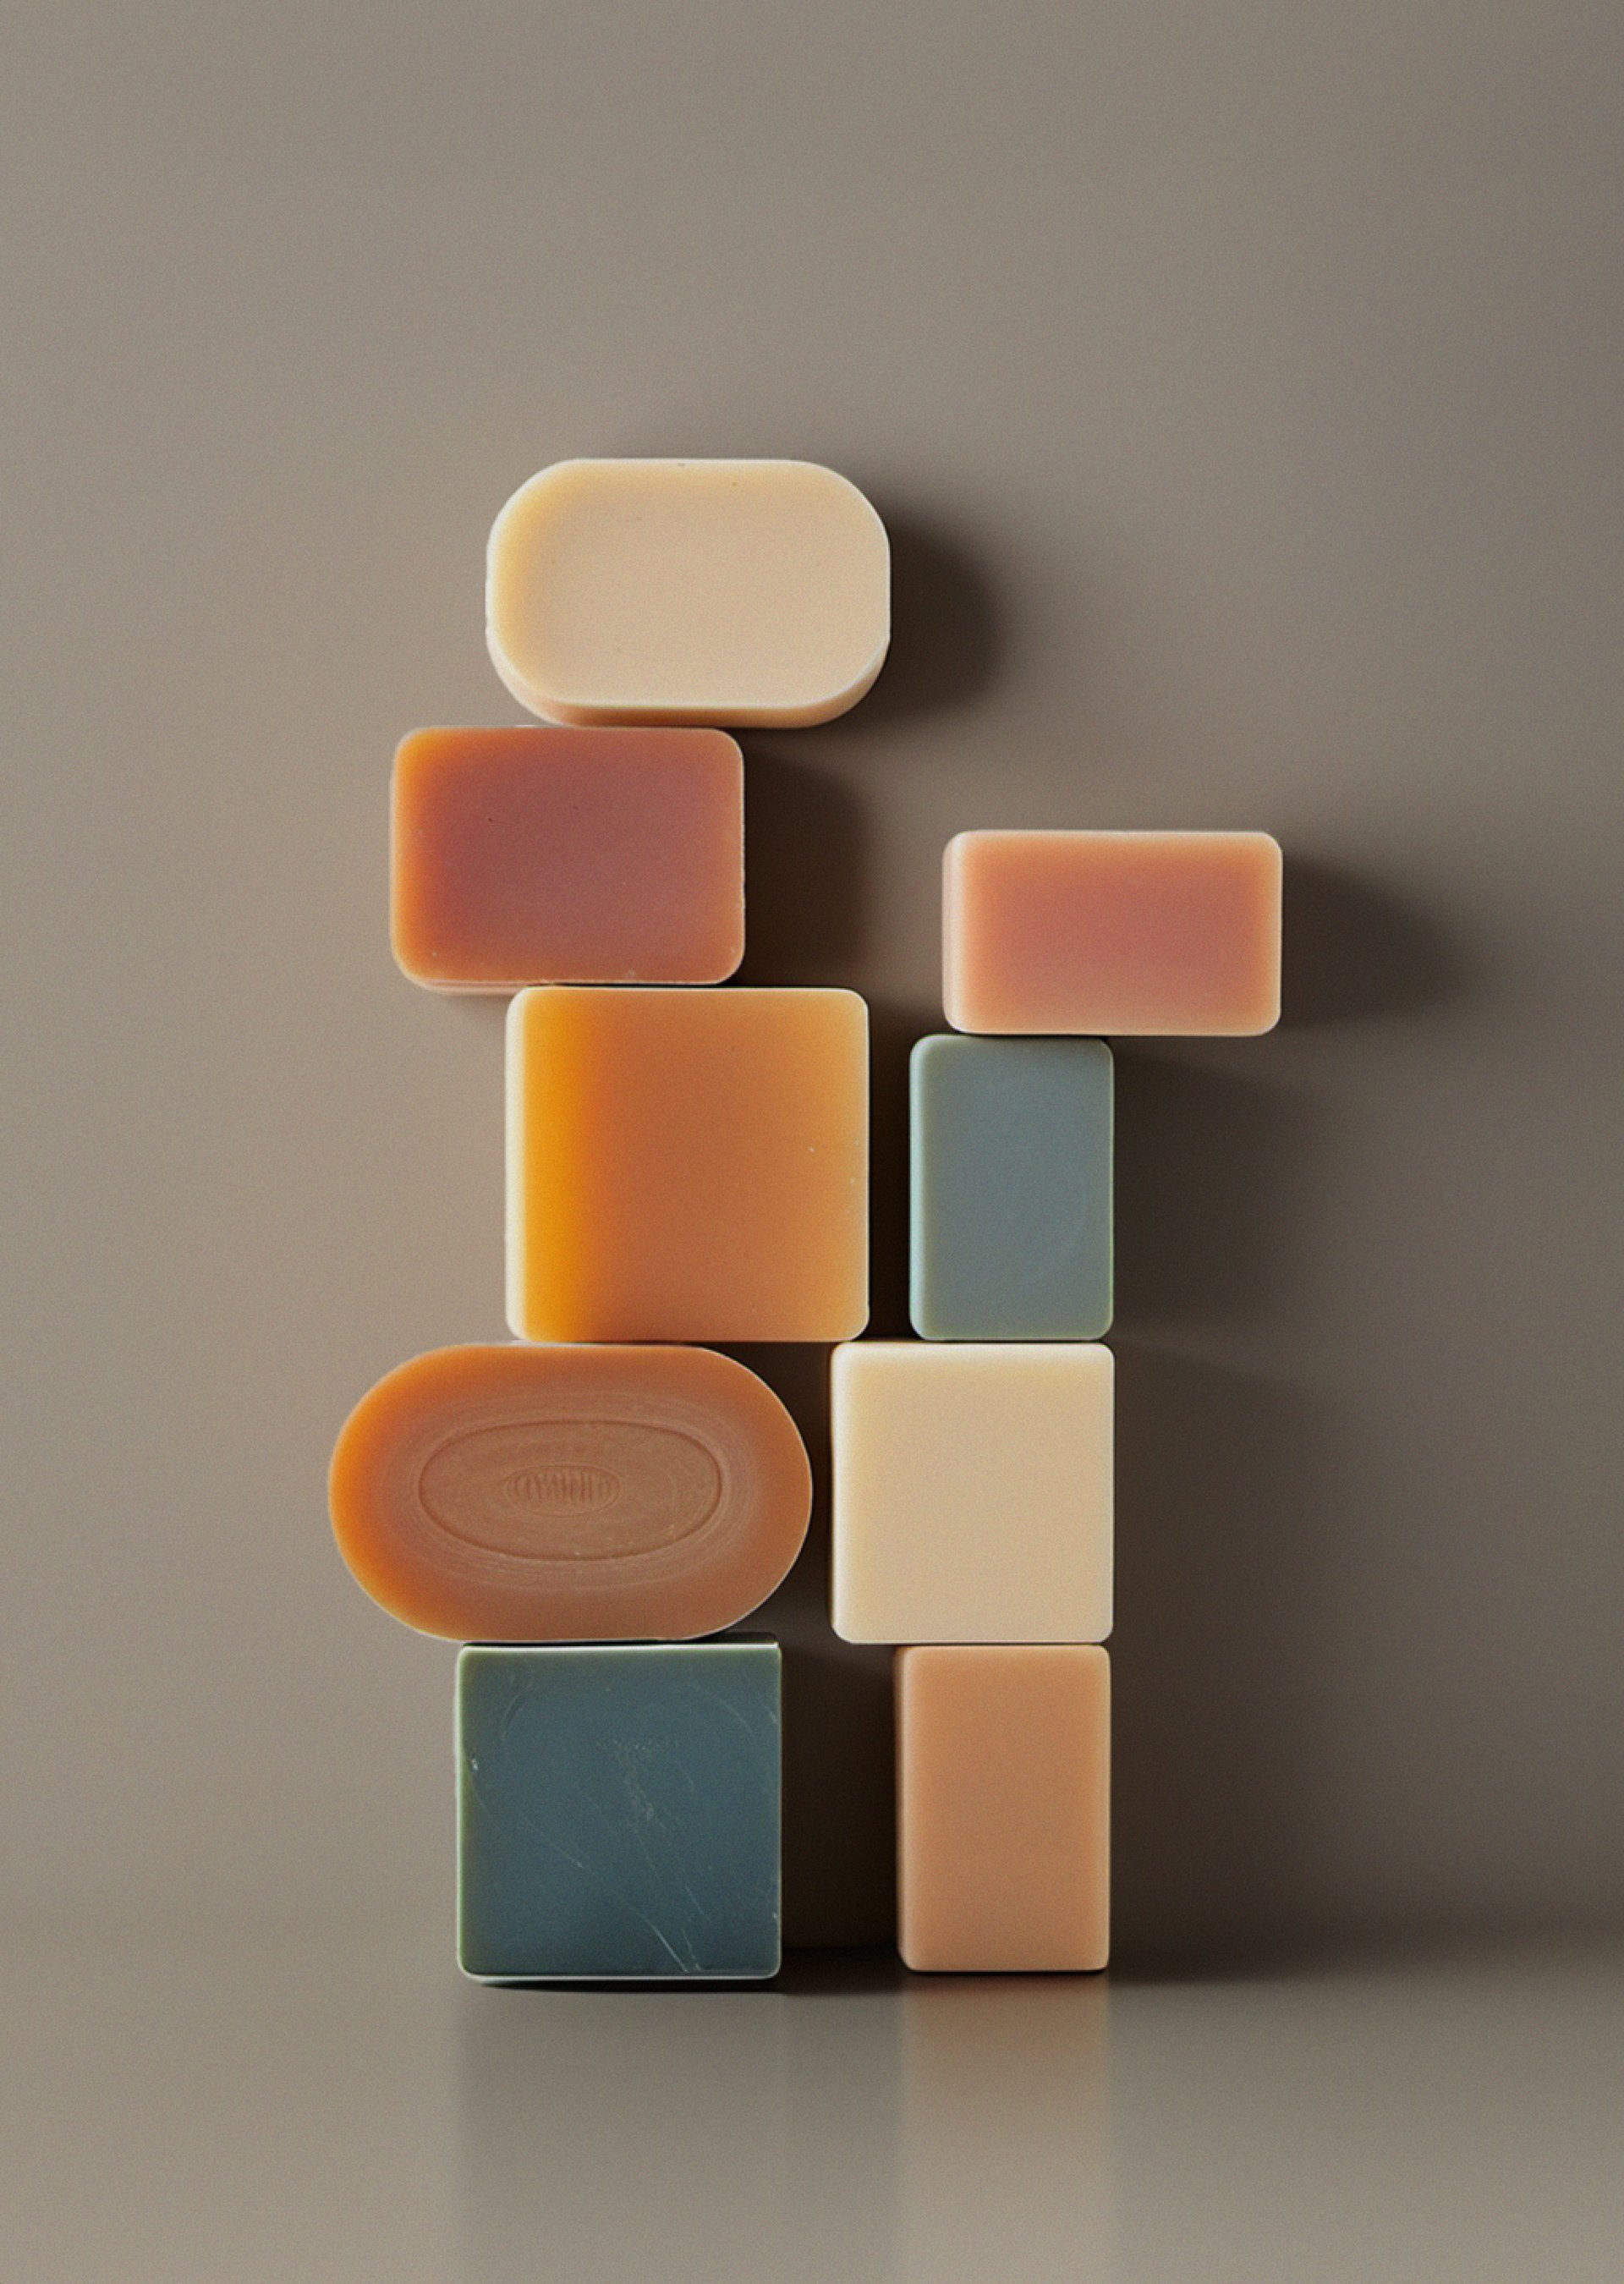 muted colored soaps stack